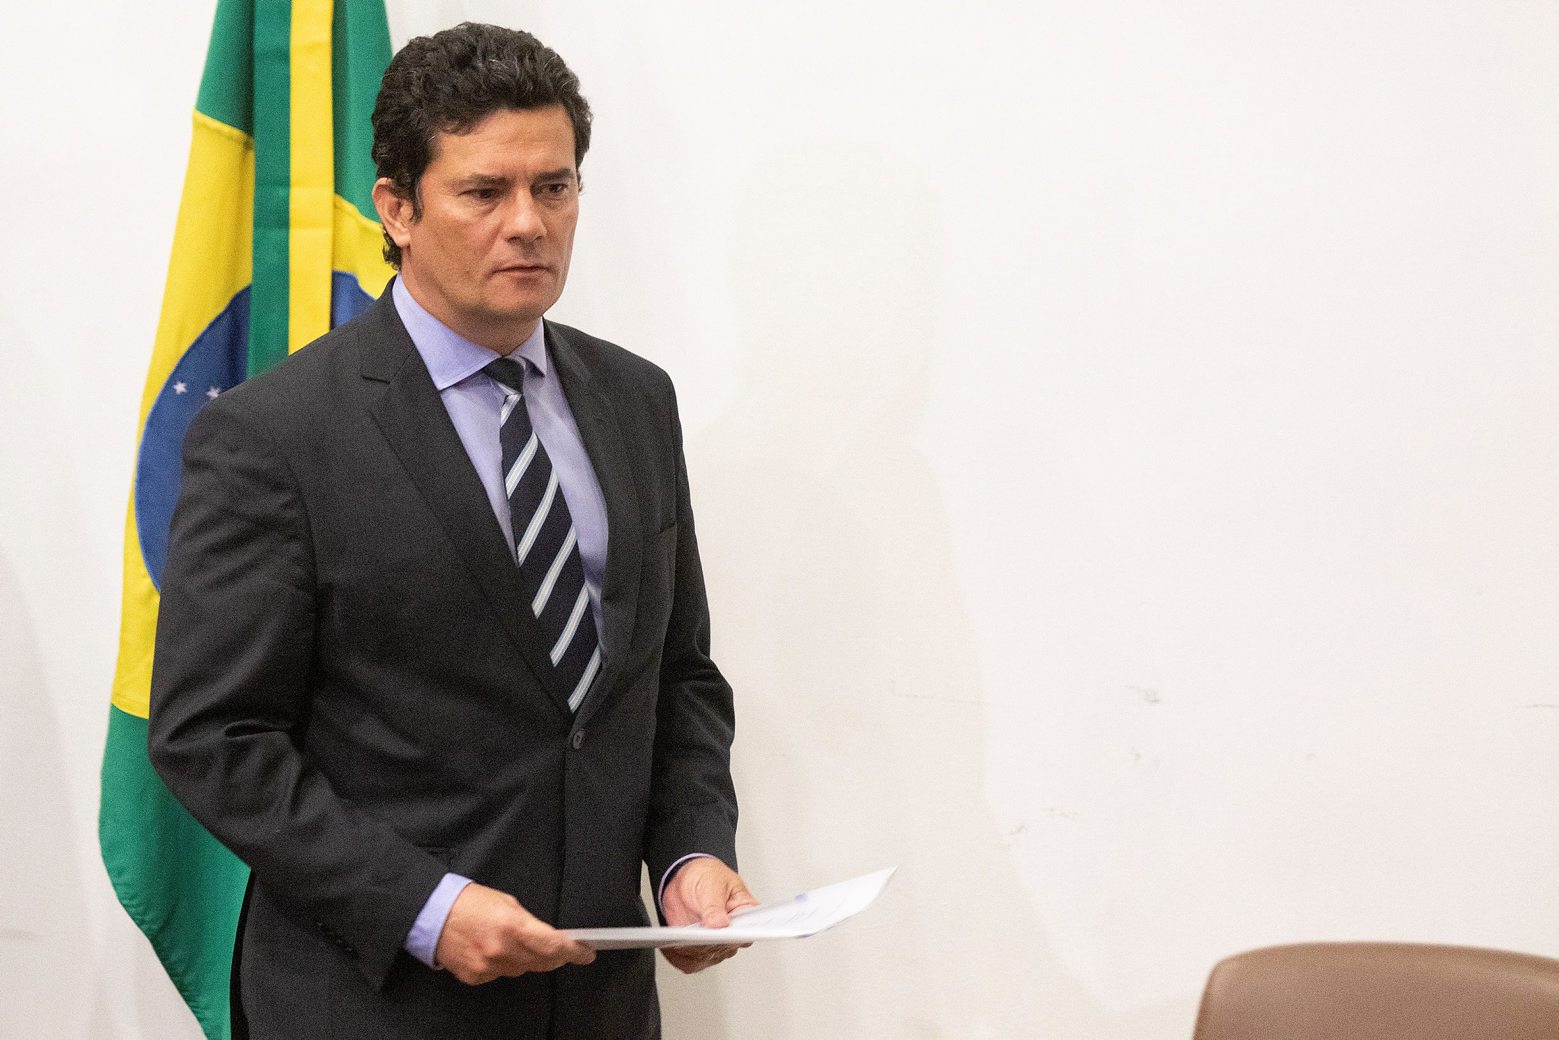 epa08382476 Brazil's Justice Minister Sergio Moro announces his resignation from government during a press conference in Brasilia, Brazil, 24 April 2020. Moro, known for imprisoning Luiz Inacio Lula da Silva as a judge, resigned today after President Jair Bolsonaro dismissed the director of the Federal Police.  EPA/JOEDSON ALVES BRAZIL JUSTICE MINISTER RESIGNS